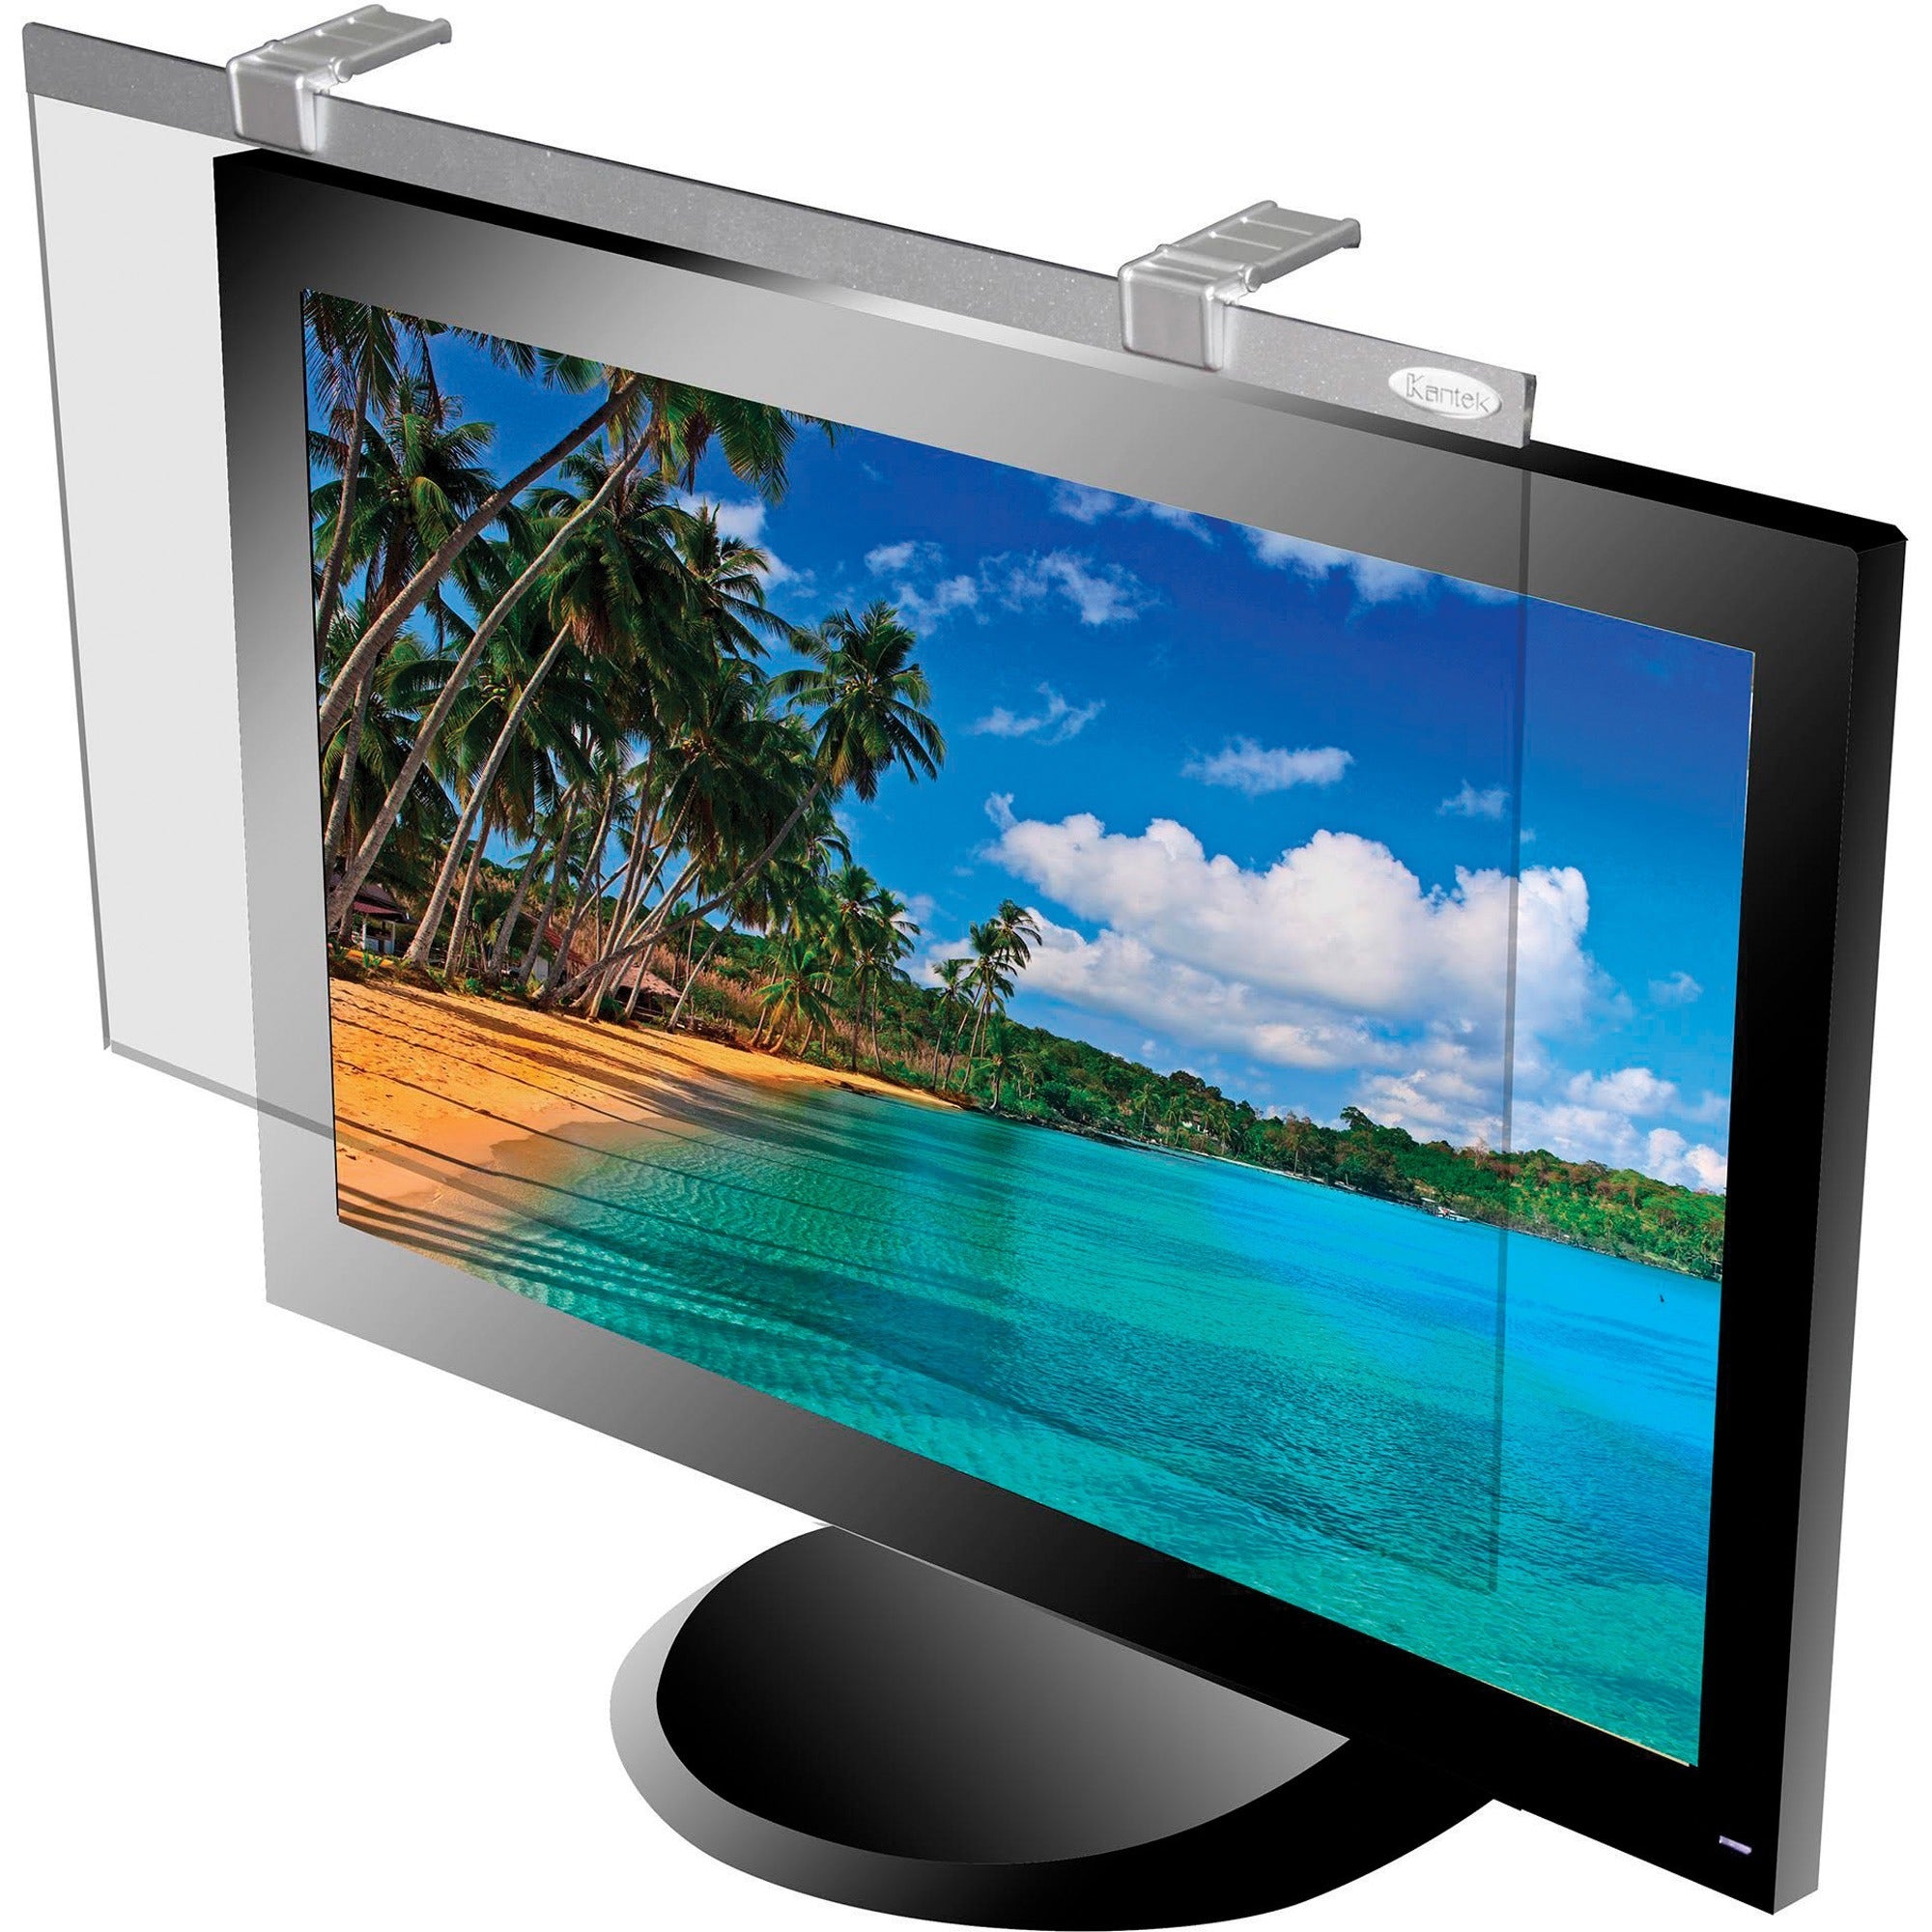 Kantek LCD Protective Filter Silver - For 21.5"LCD, 22" Monitor - Scratch Resistant, Damage Resistant - Acrylic - Anti-glare - 1 Pack - 1